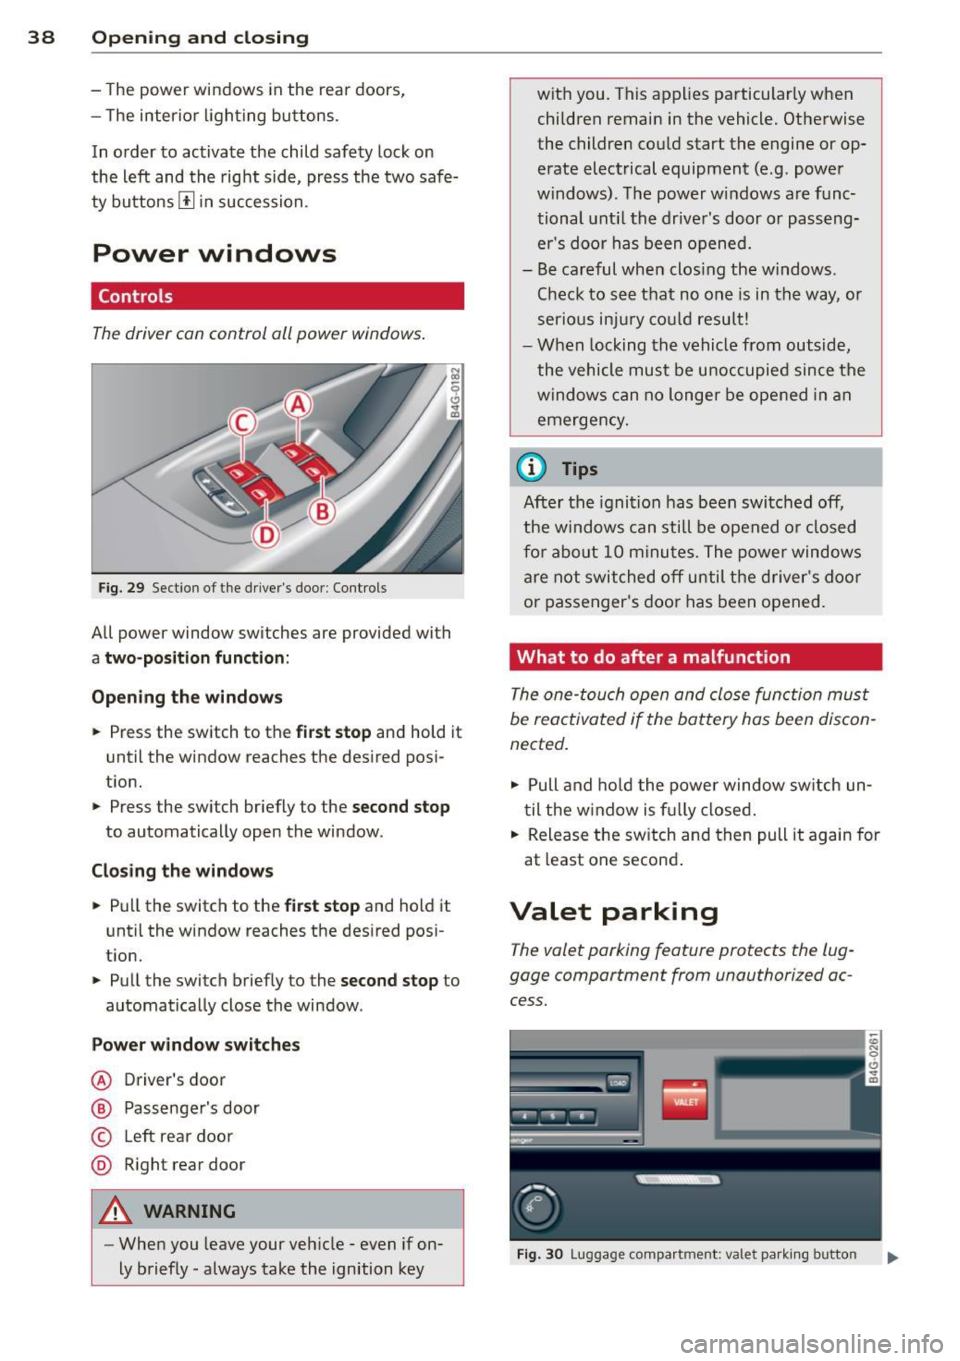 AUDI A6 2012  Owners Manual 38  Openin g and  clo sing 
- The  power  windows  in the  rear  doors, 
- The  interior  l ighting  buttons. 
In  order  to  activate  the  child  safety  lock on 
the  left  and  the  right  side,  